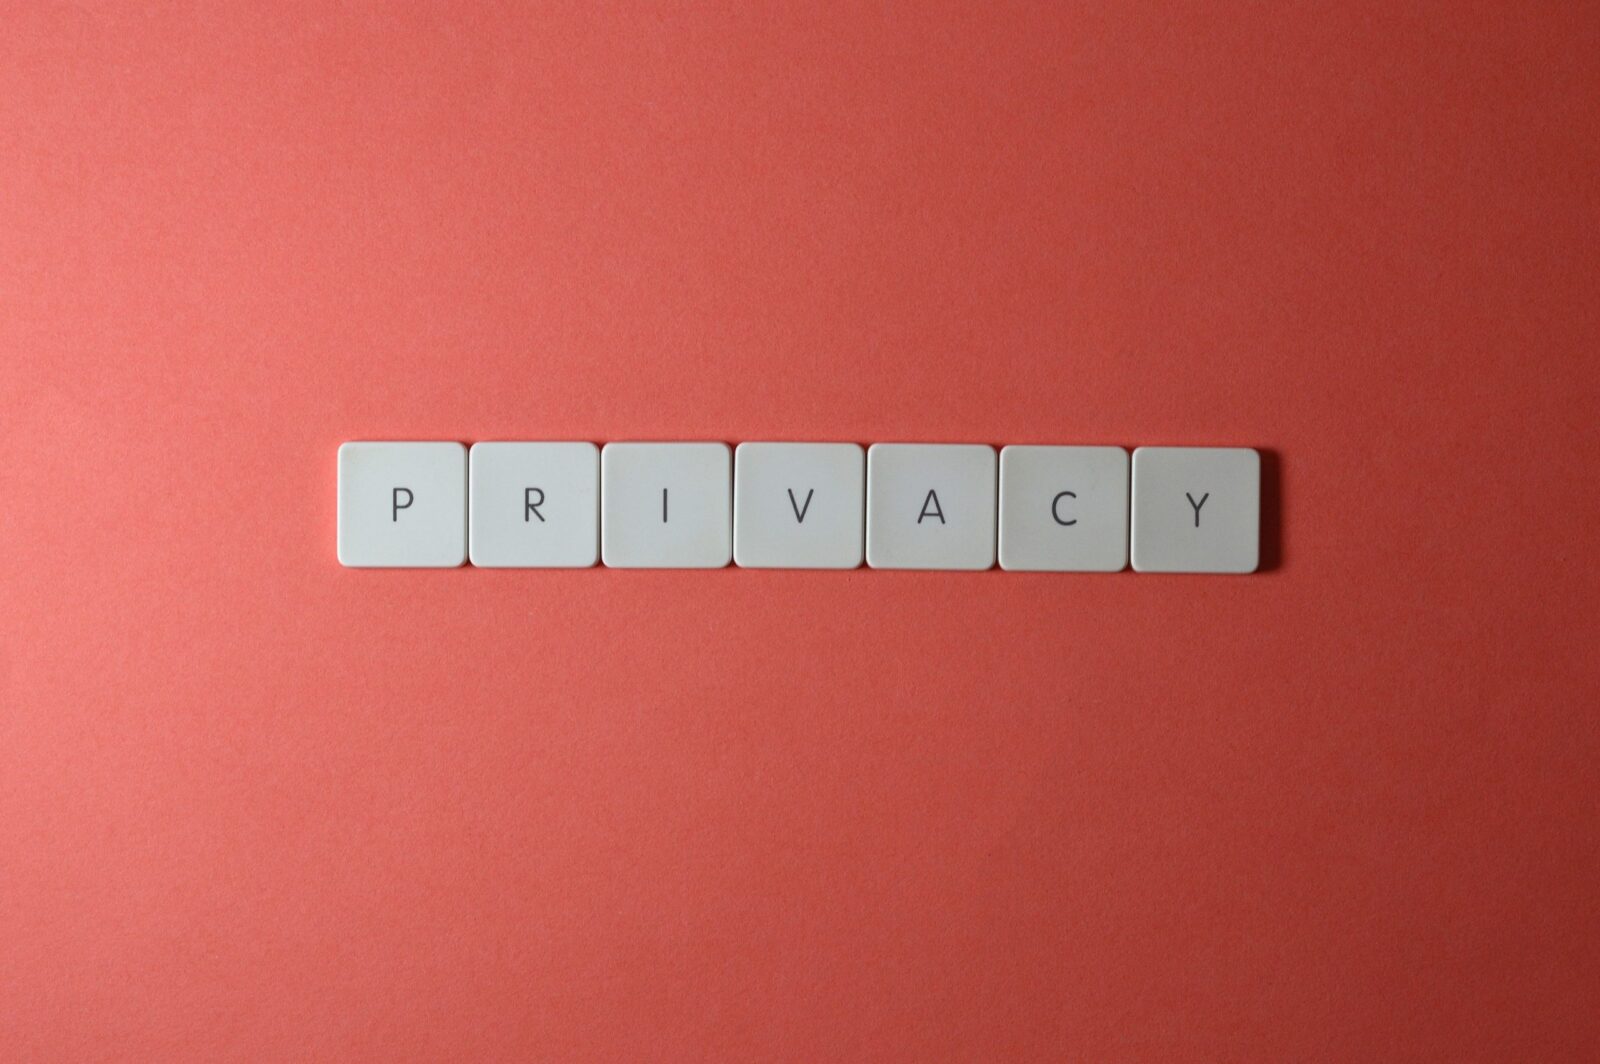 What Most Folks Get Wrong About Estate Planning and Privacy